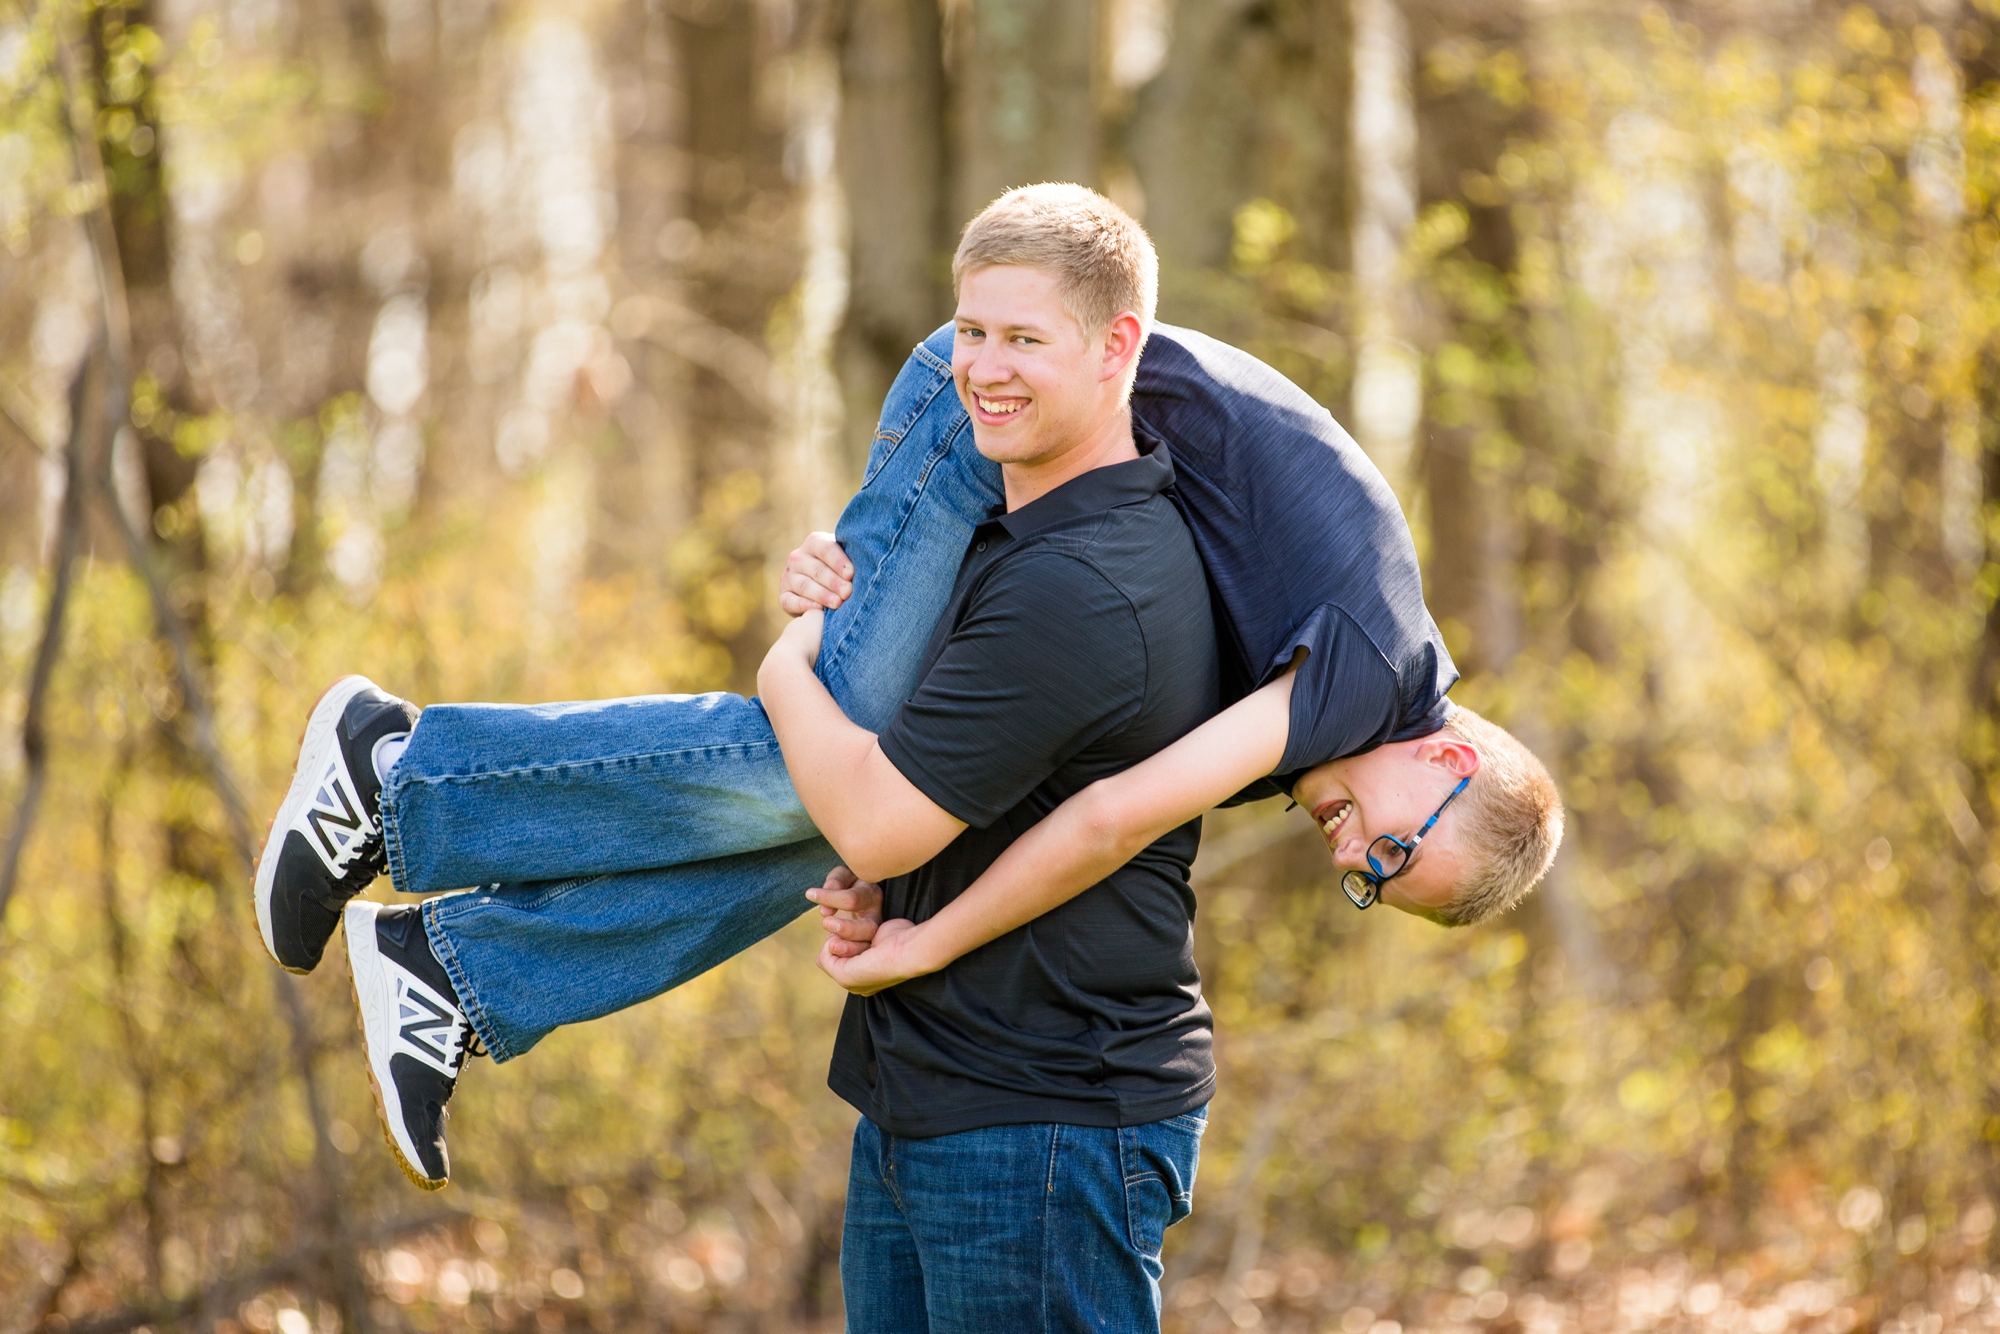 cranberry township family pictures, cranberry township family photographer, cranberry township senior photographer, pittsburgh senior photos, cranberry township parks